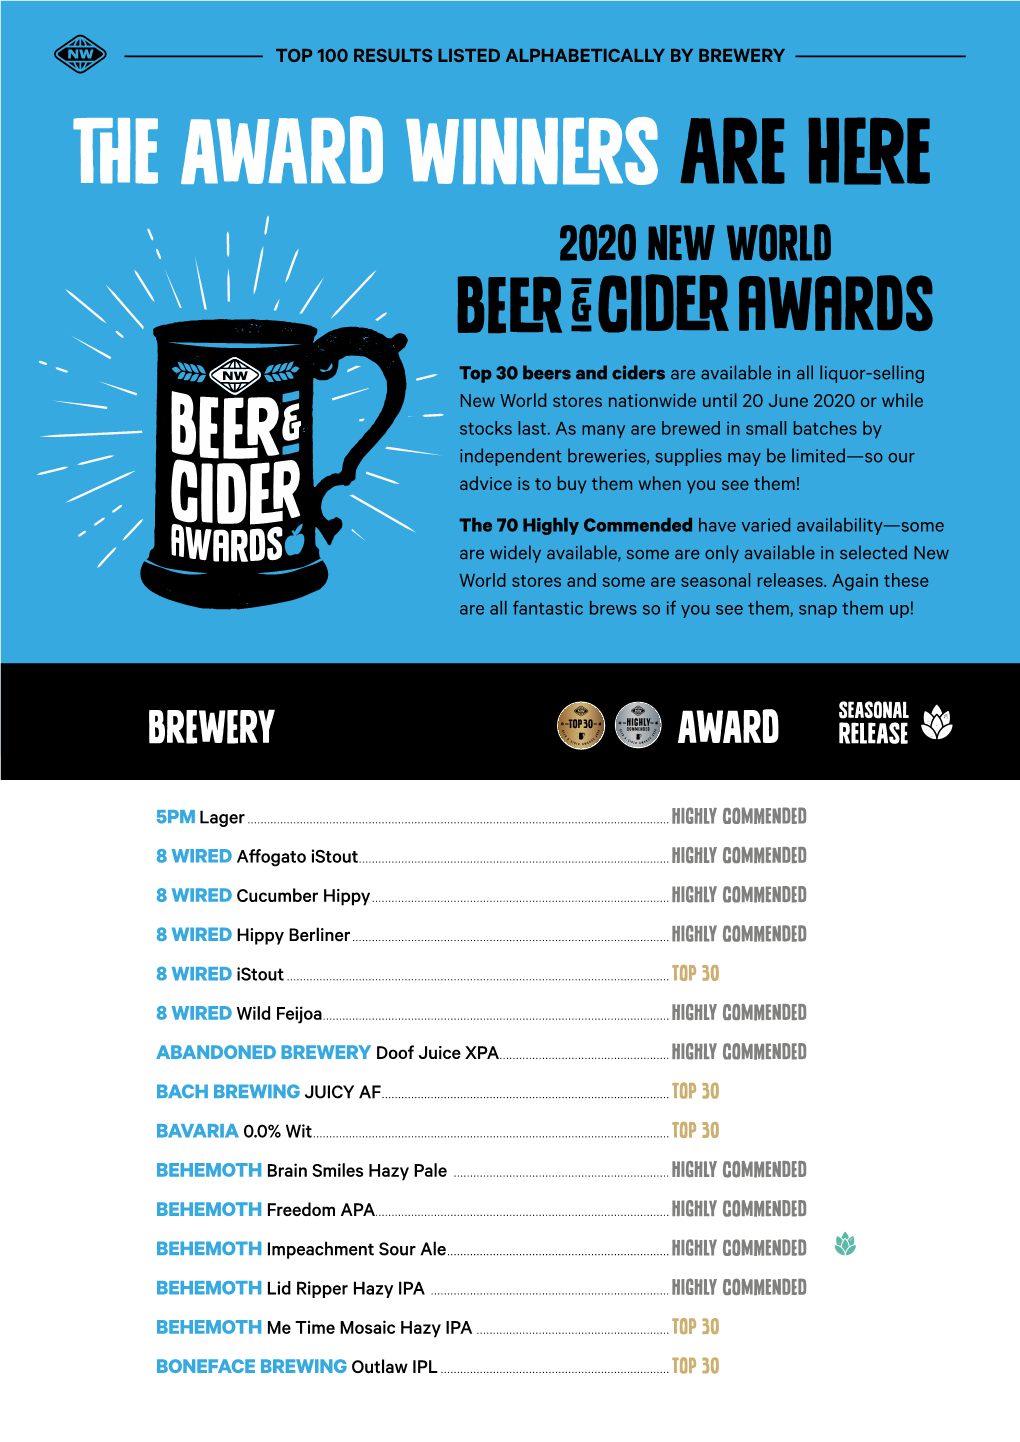 Brewery Award Release